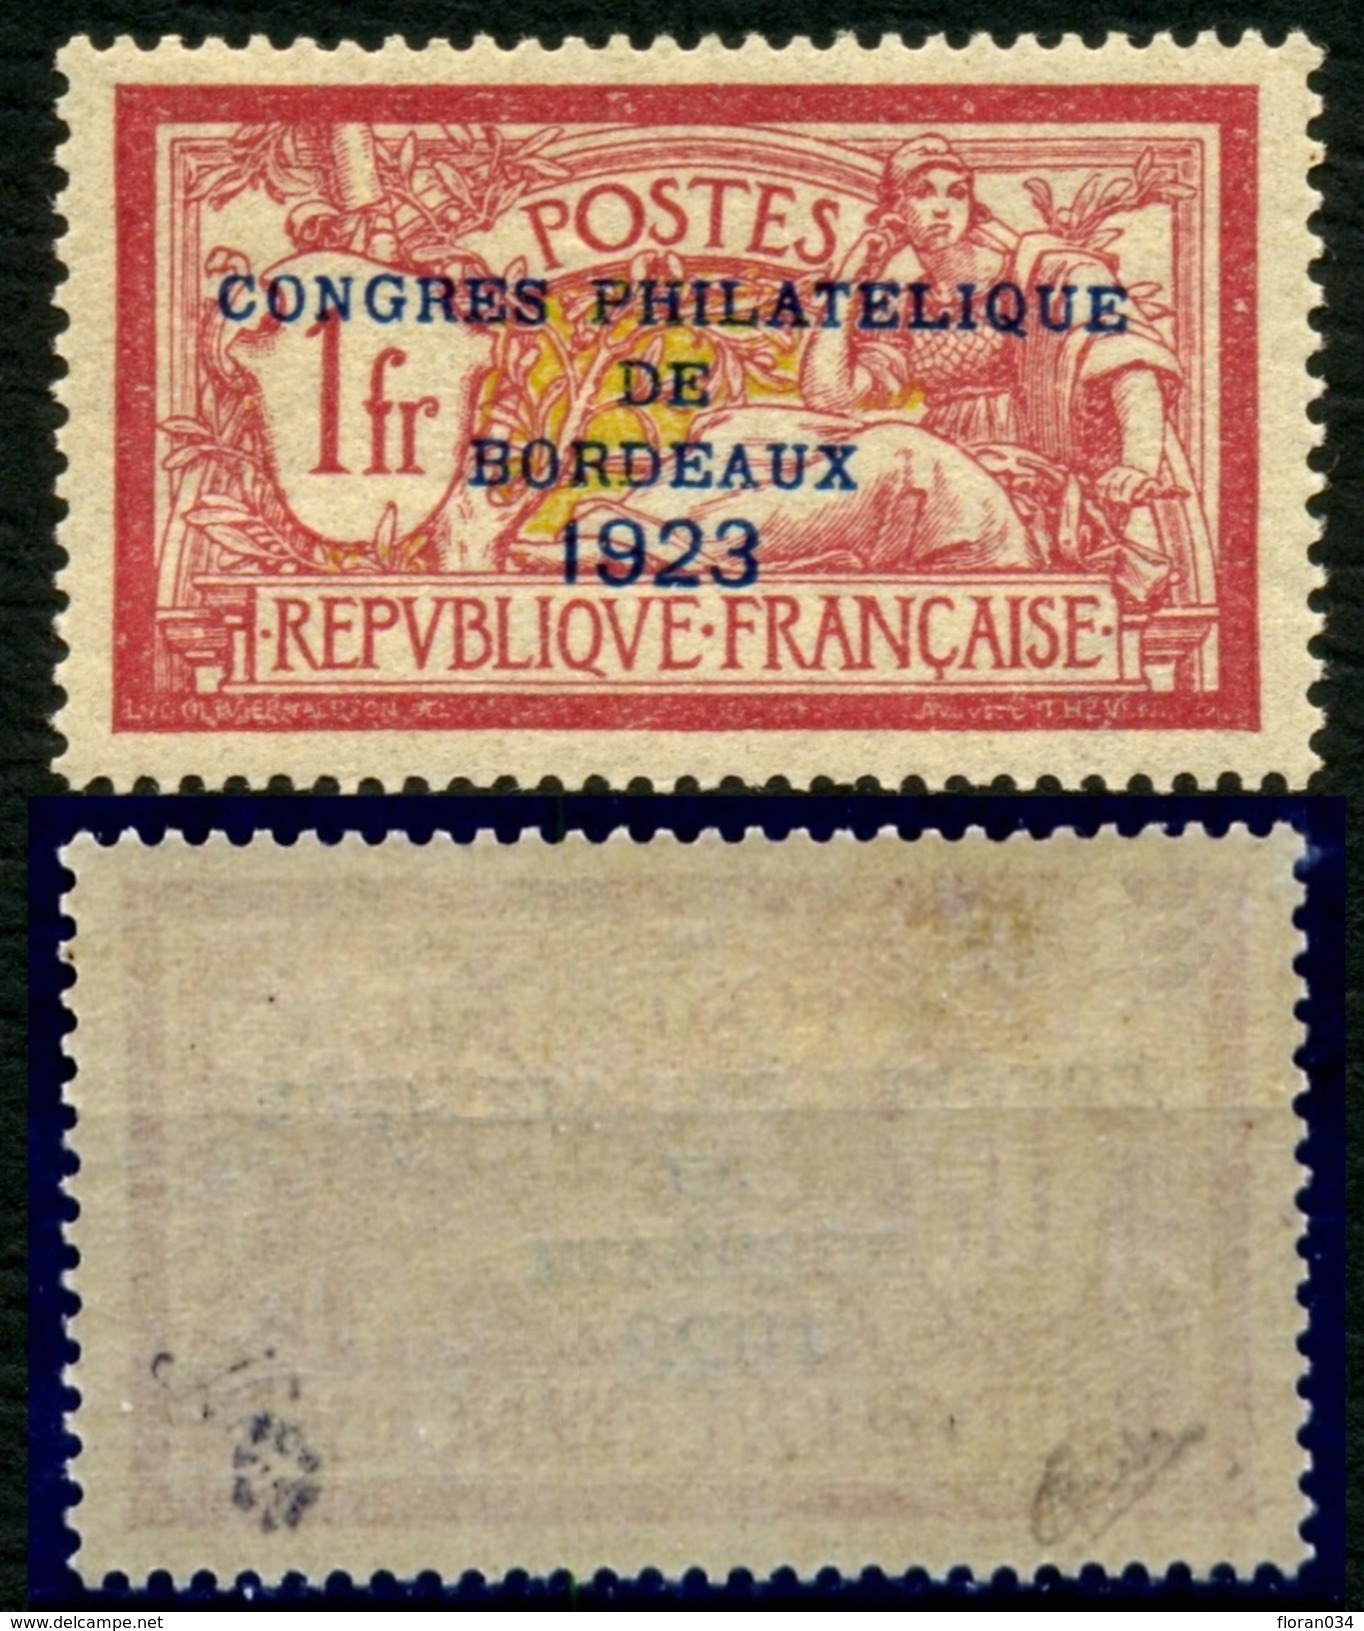 France N° 182 Neuf  ** (MNH) - Centrage Parfait - Signé Calves - Cote 1387 Euros - LUXE - Used Stamps